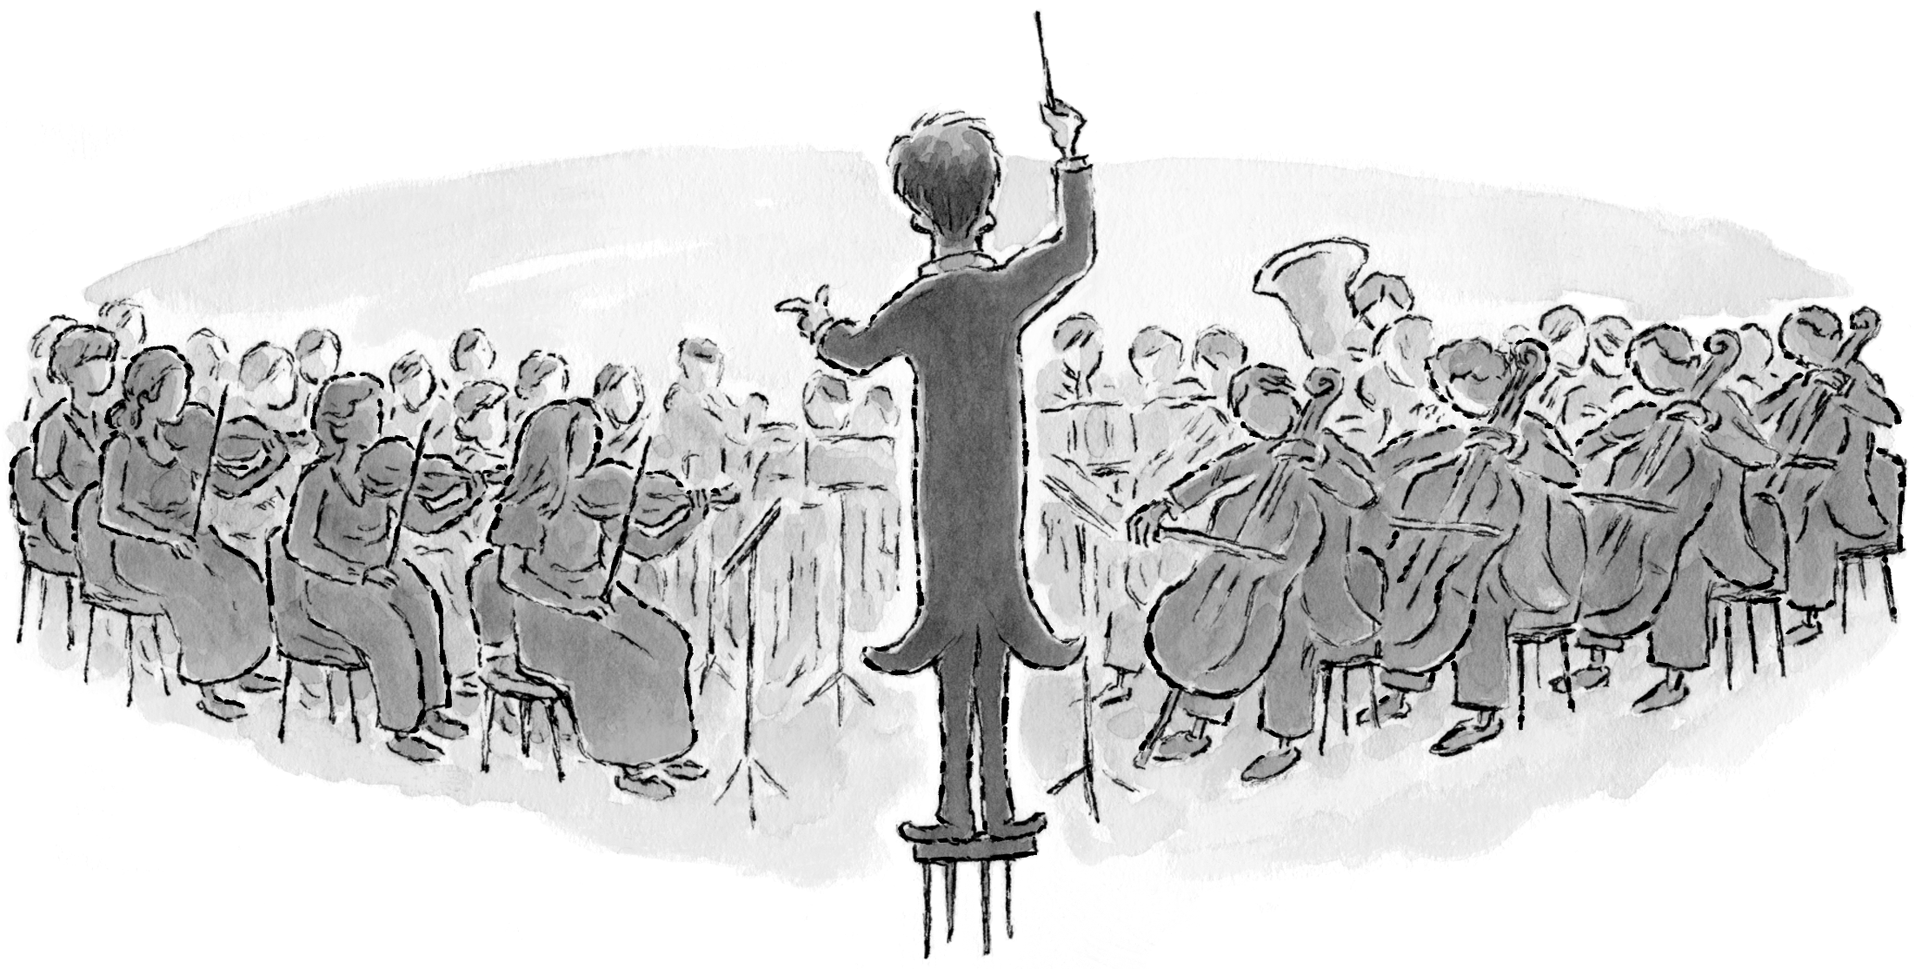 Illustration of a person conducting an orchestra. Perspective is centered behind the person, who is standing on a small stool.